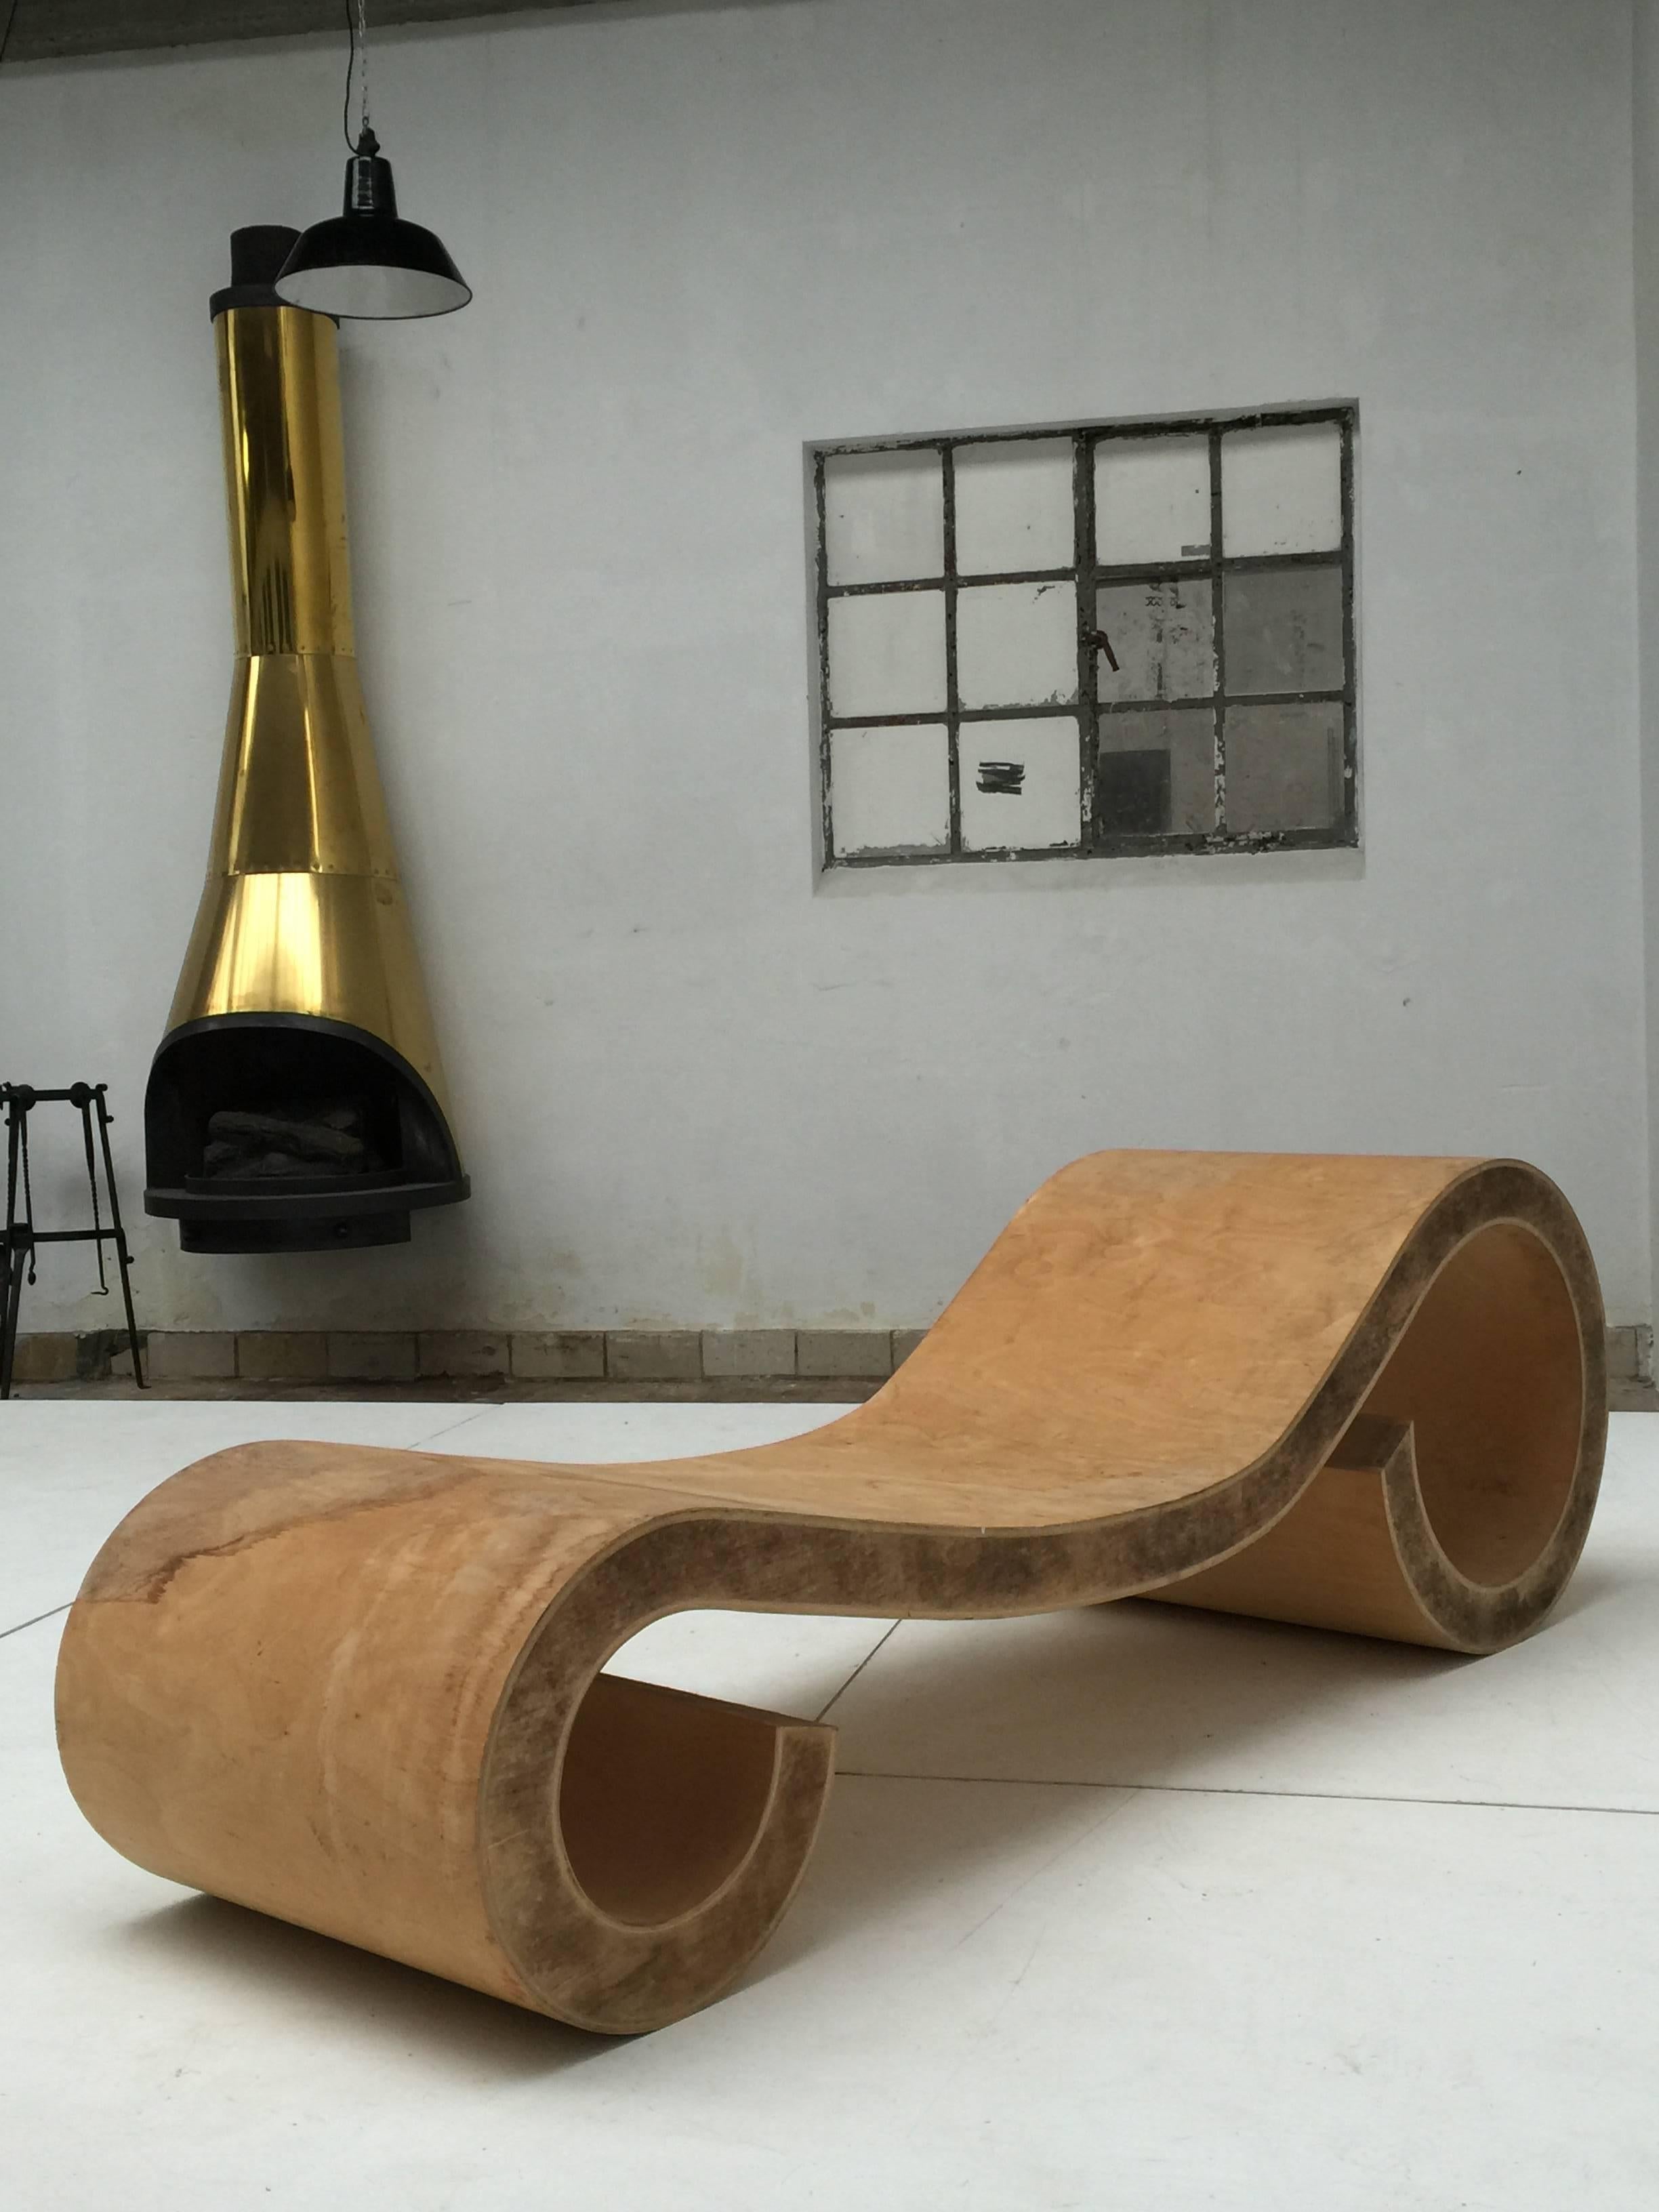 Plywood Prototype Chaise Longue by Dutch Architect and Sculpture Dries Kreijkamp